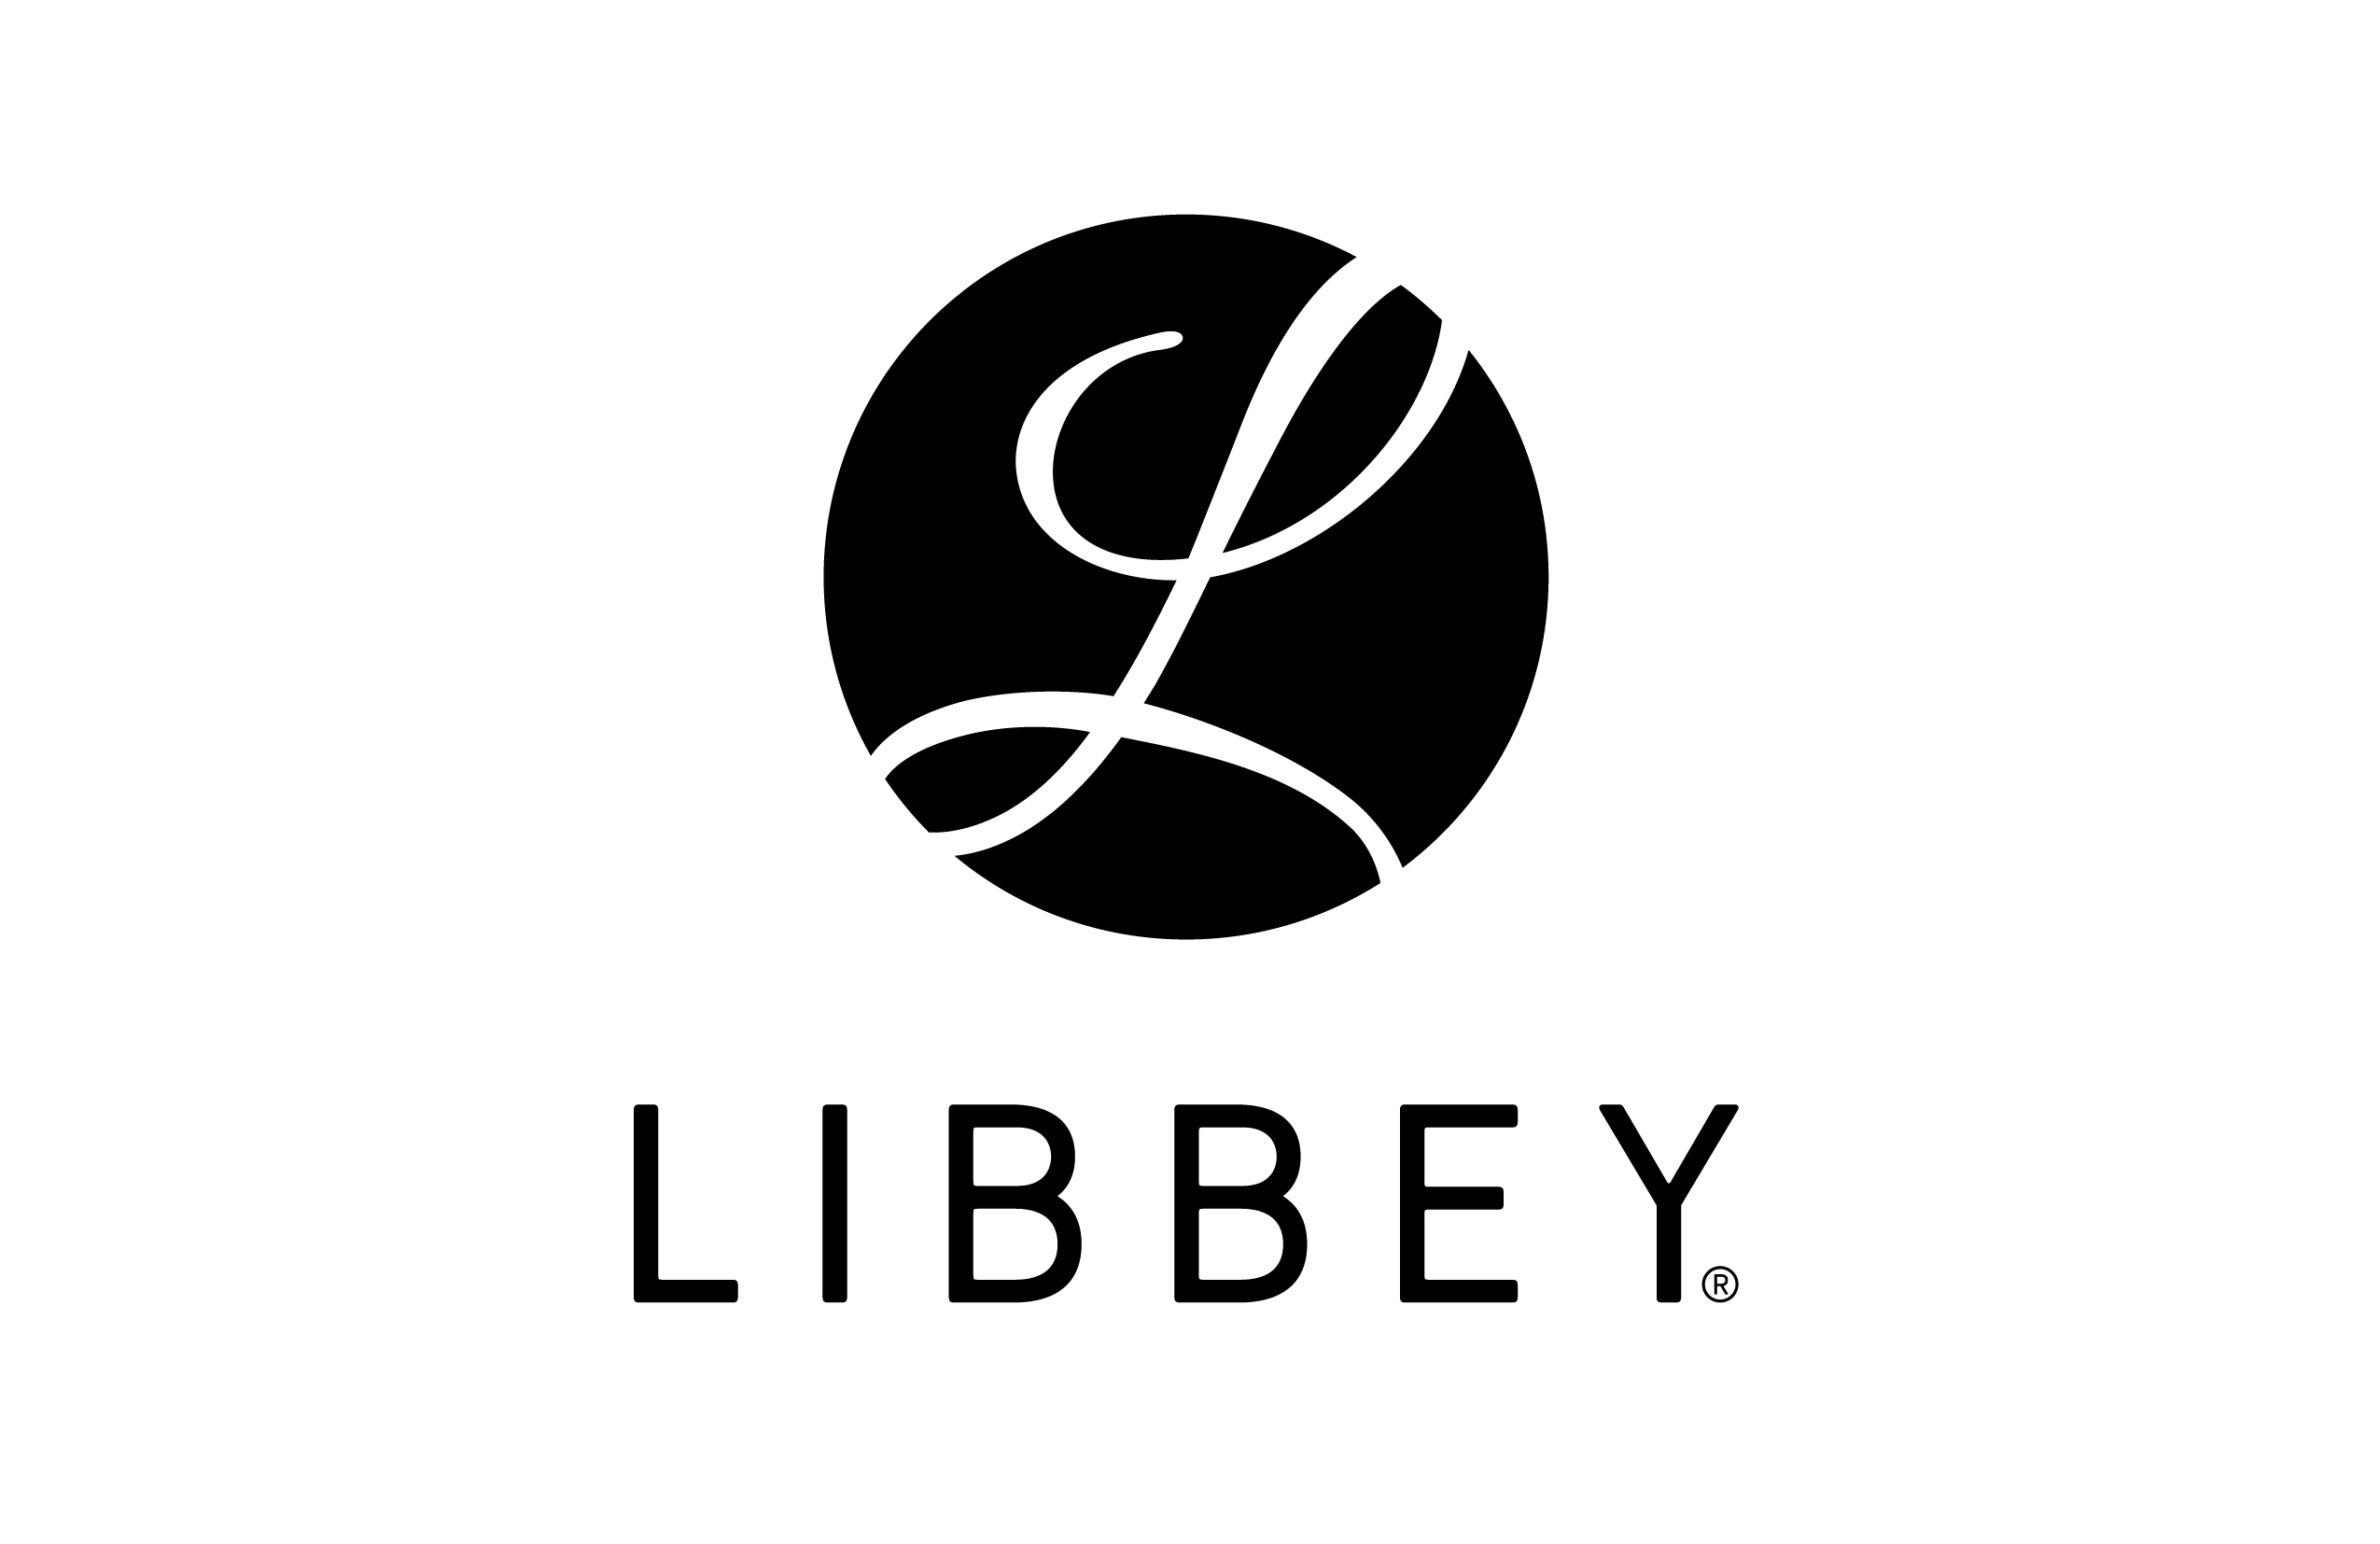 Libbey Provides Additional Business Update on COVID-19 Response